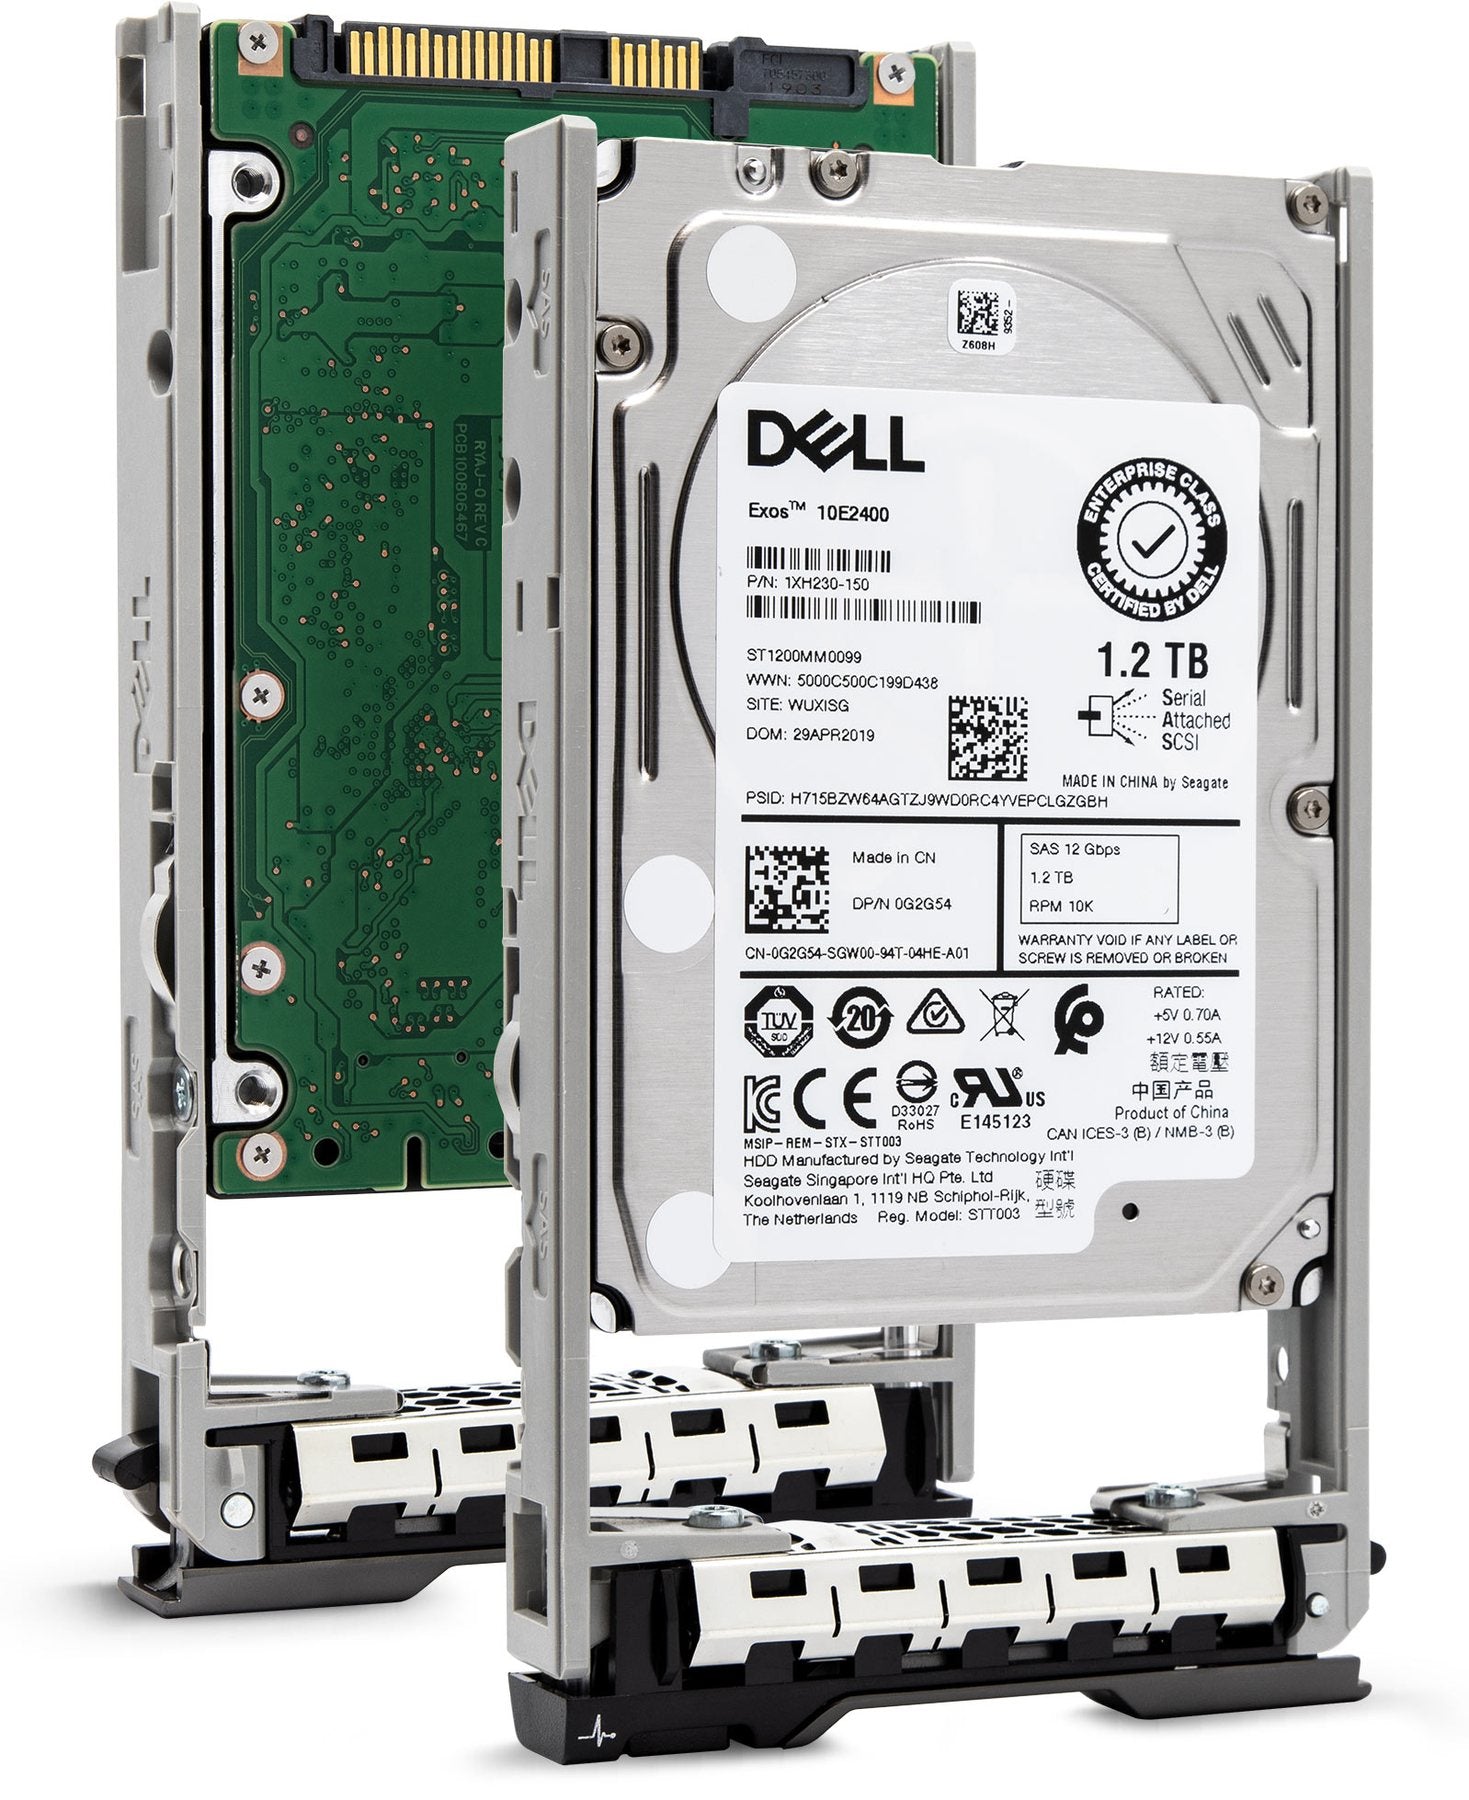 Dell G13 GK8MY 1.2TB 10K RPM SAS 12Gb/s 512n 2.5" Manufacturer Recertified HDD